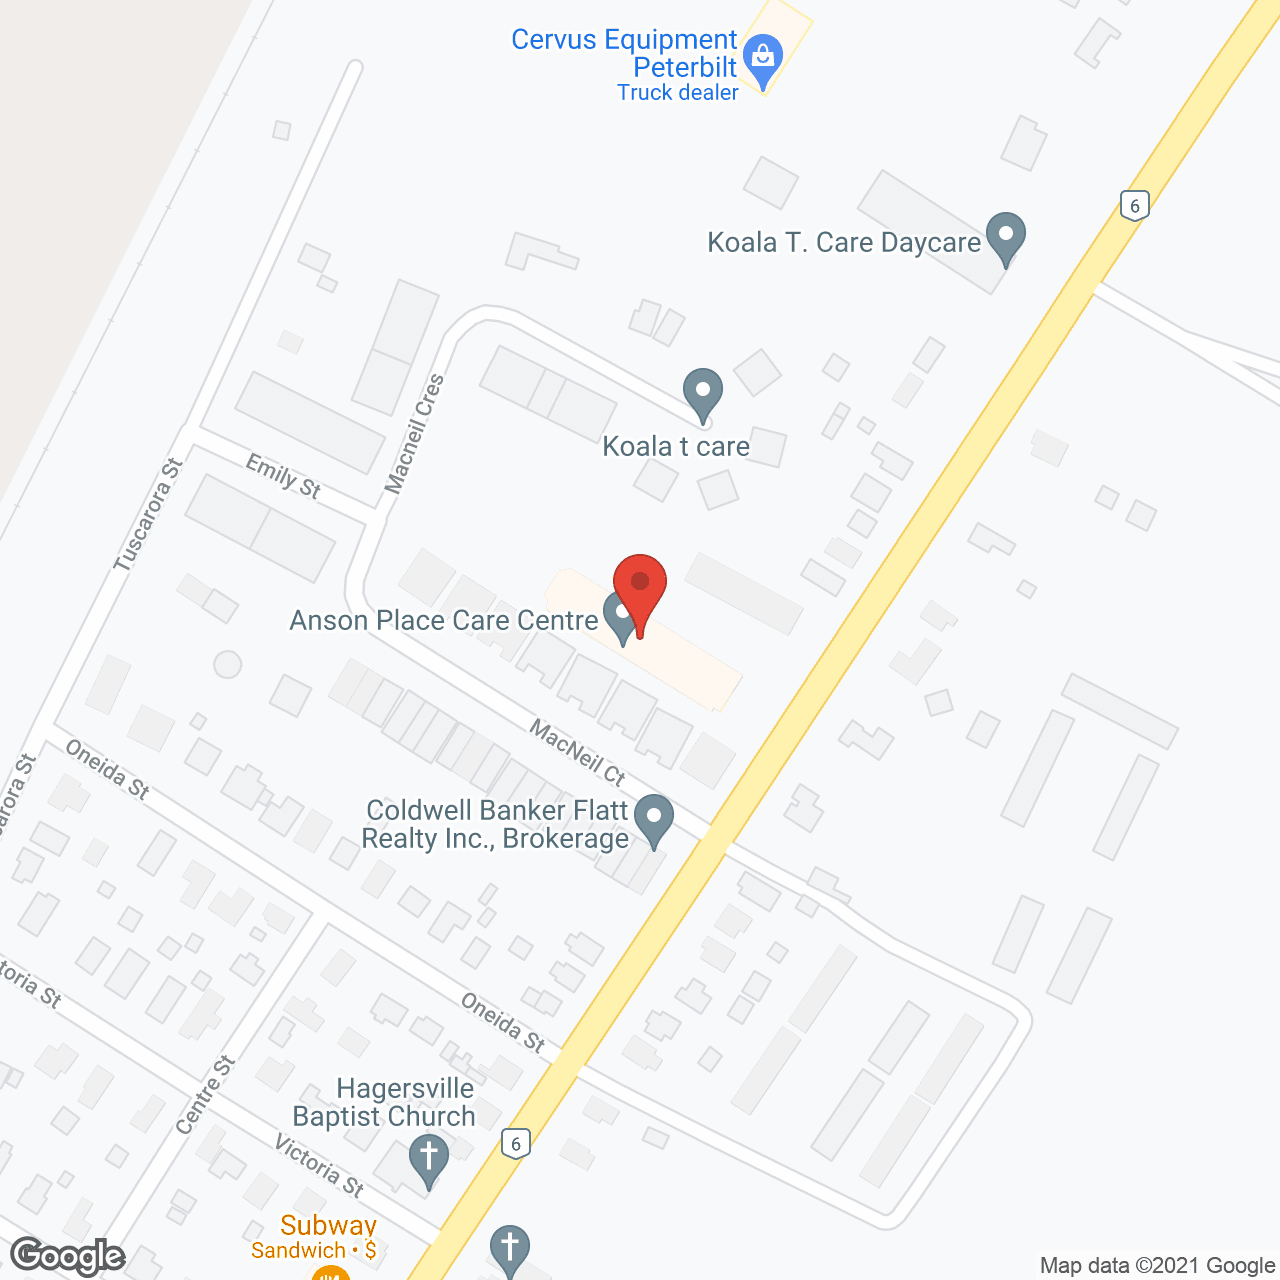 Anson Place Care Centre in google map